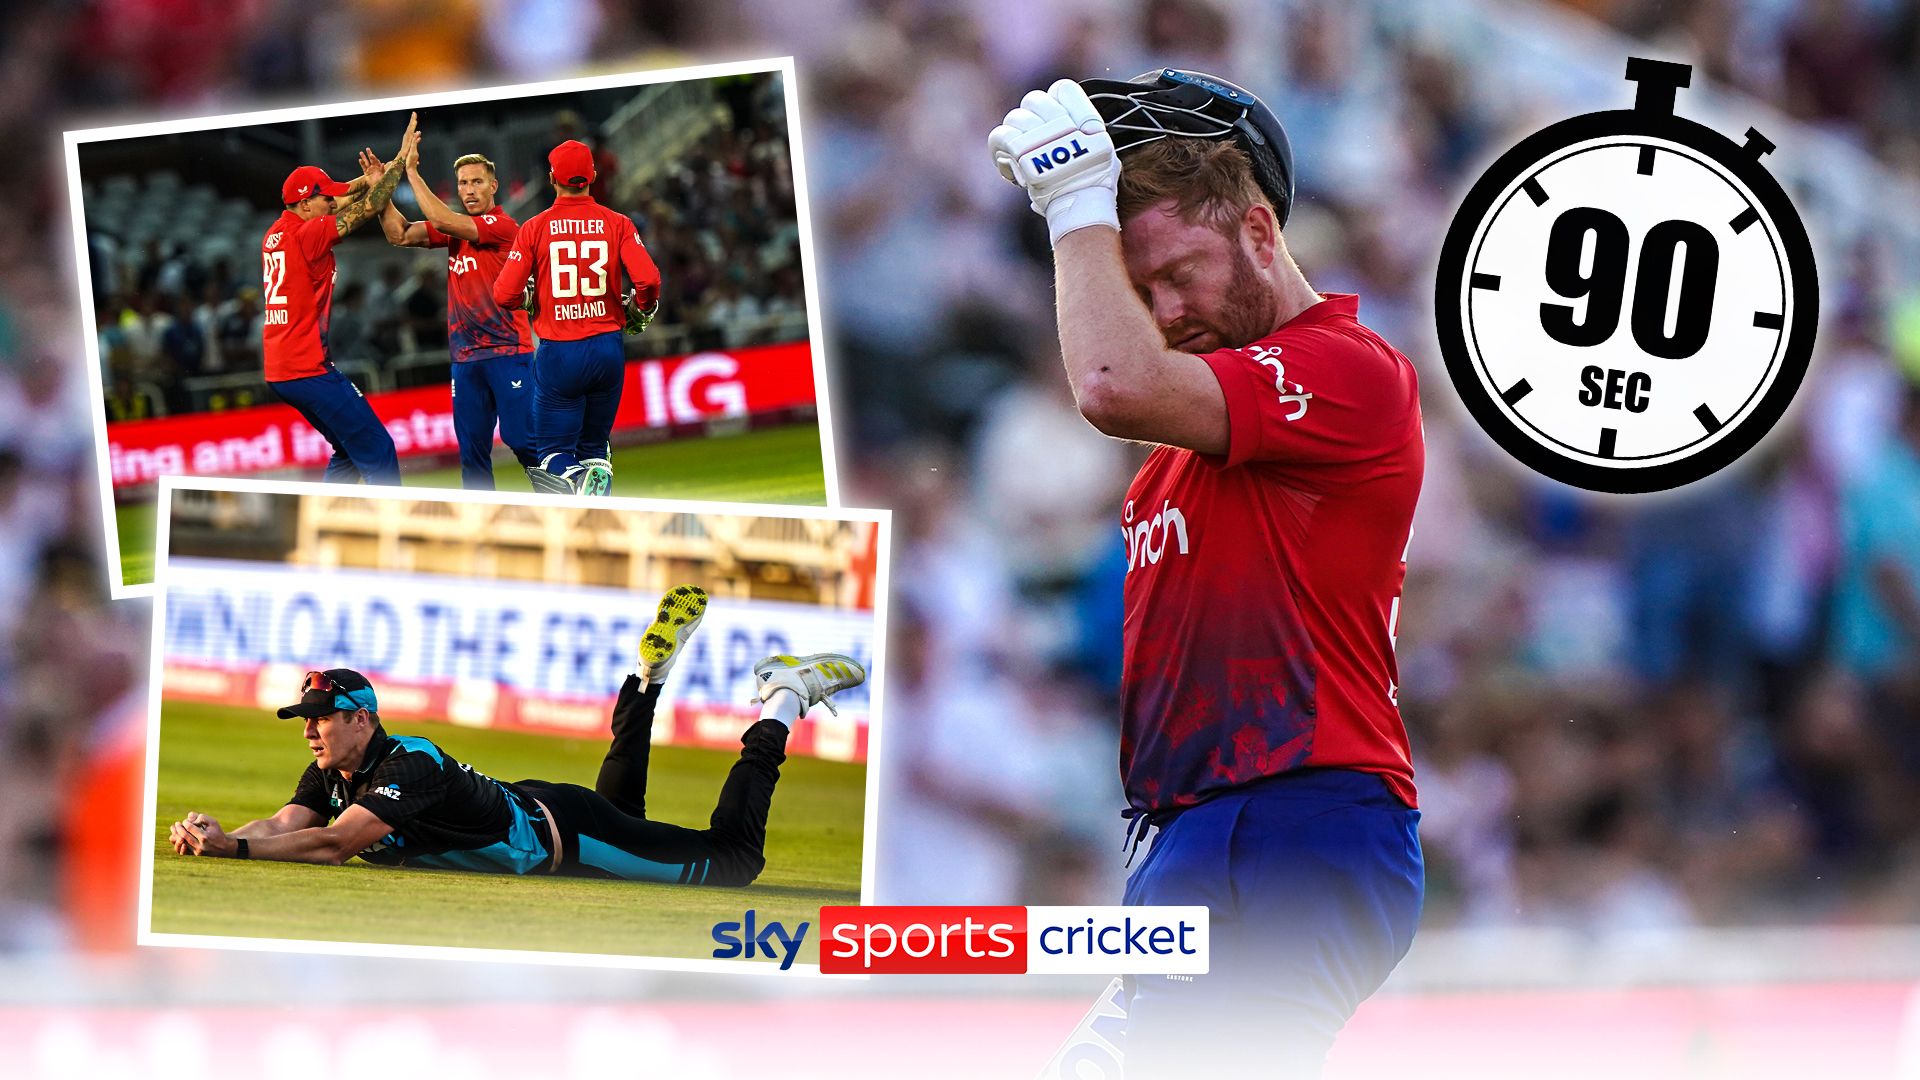 All 12 wickets in 90 seconds | England vs New Zealand, 4th T20